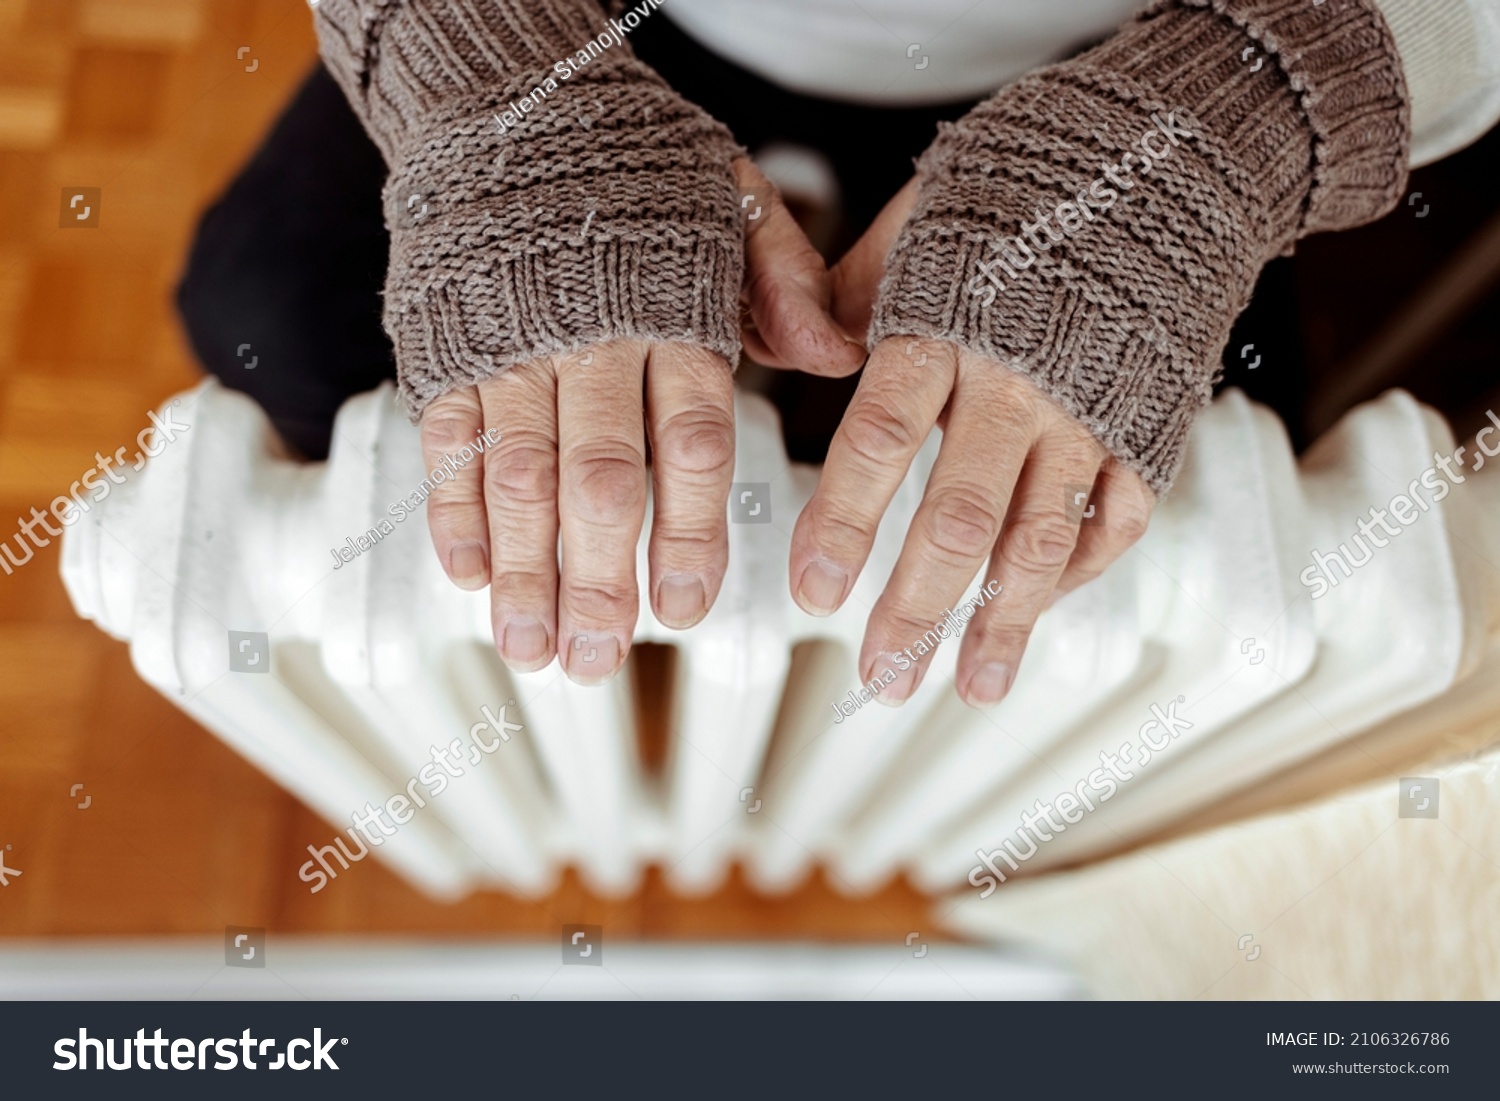 A man hands in wool gloves warm near the heater. Old men's hands in knitted gloves on heating radiator at home during the day. Person heating their hands at home over a domestic radiator in winter. #2106326786